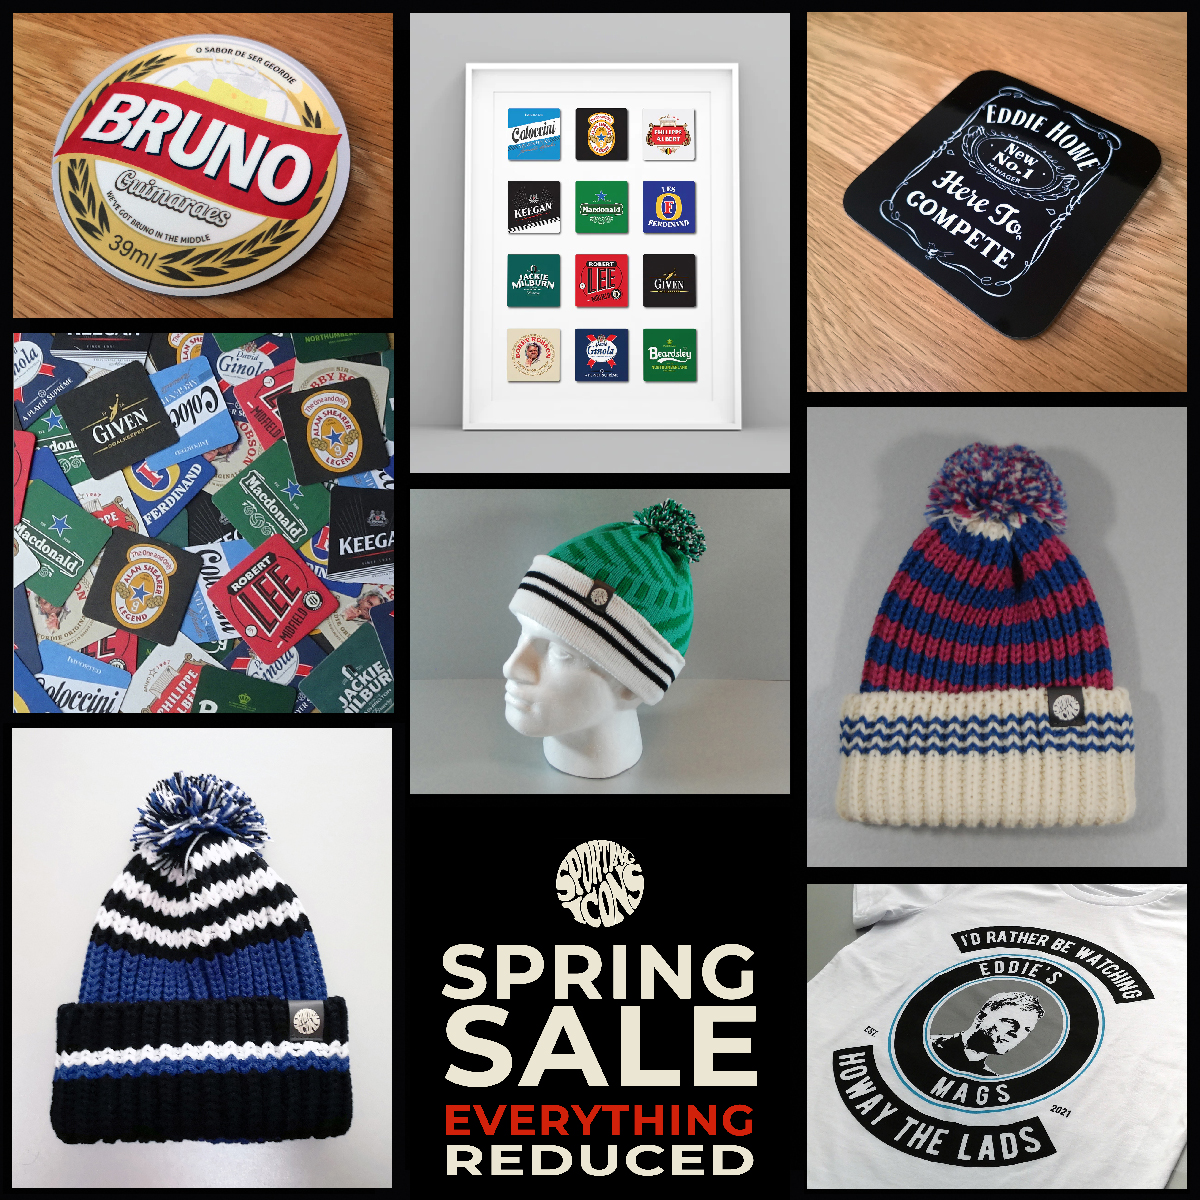 #NUFC fans, check out our Spring Sale. 🔥 Every Item Reduced 🔥 Huge Discounts 🔥 Limited Editions sportingicons.co.uk/collections/ne… #NewcastleUnited #NUFC #ToonArmy #HWTL #Mags